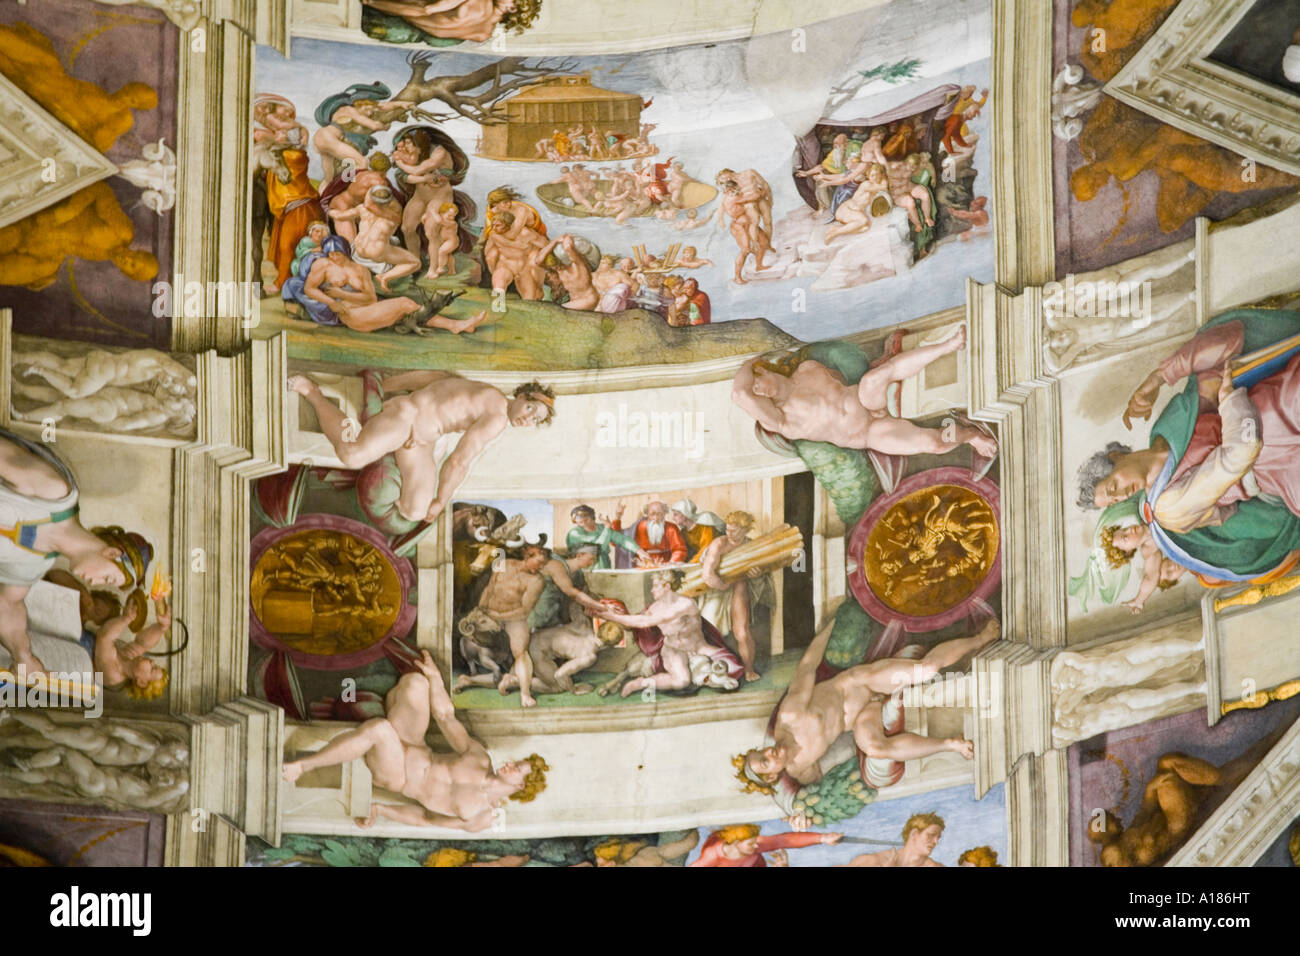 Sistine Chapel ceiling frescoes Sacrifice of Noah and The Flood by Michelangelo Vatican Museum Rome Italy Europe EU Stock Photo